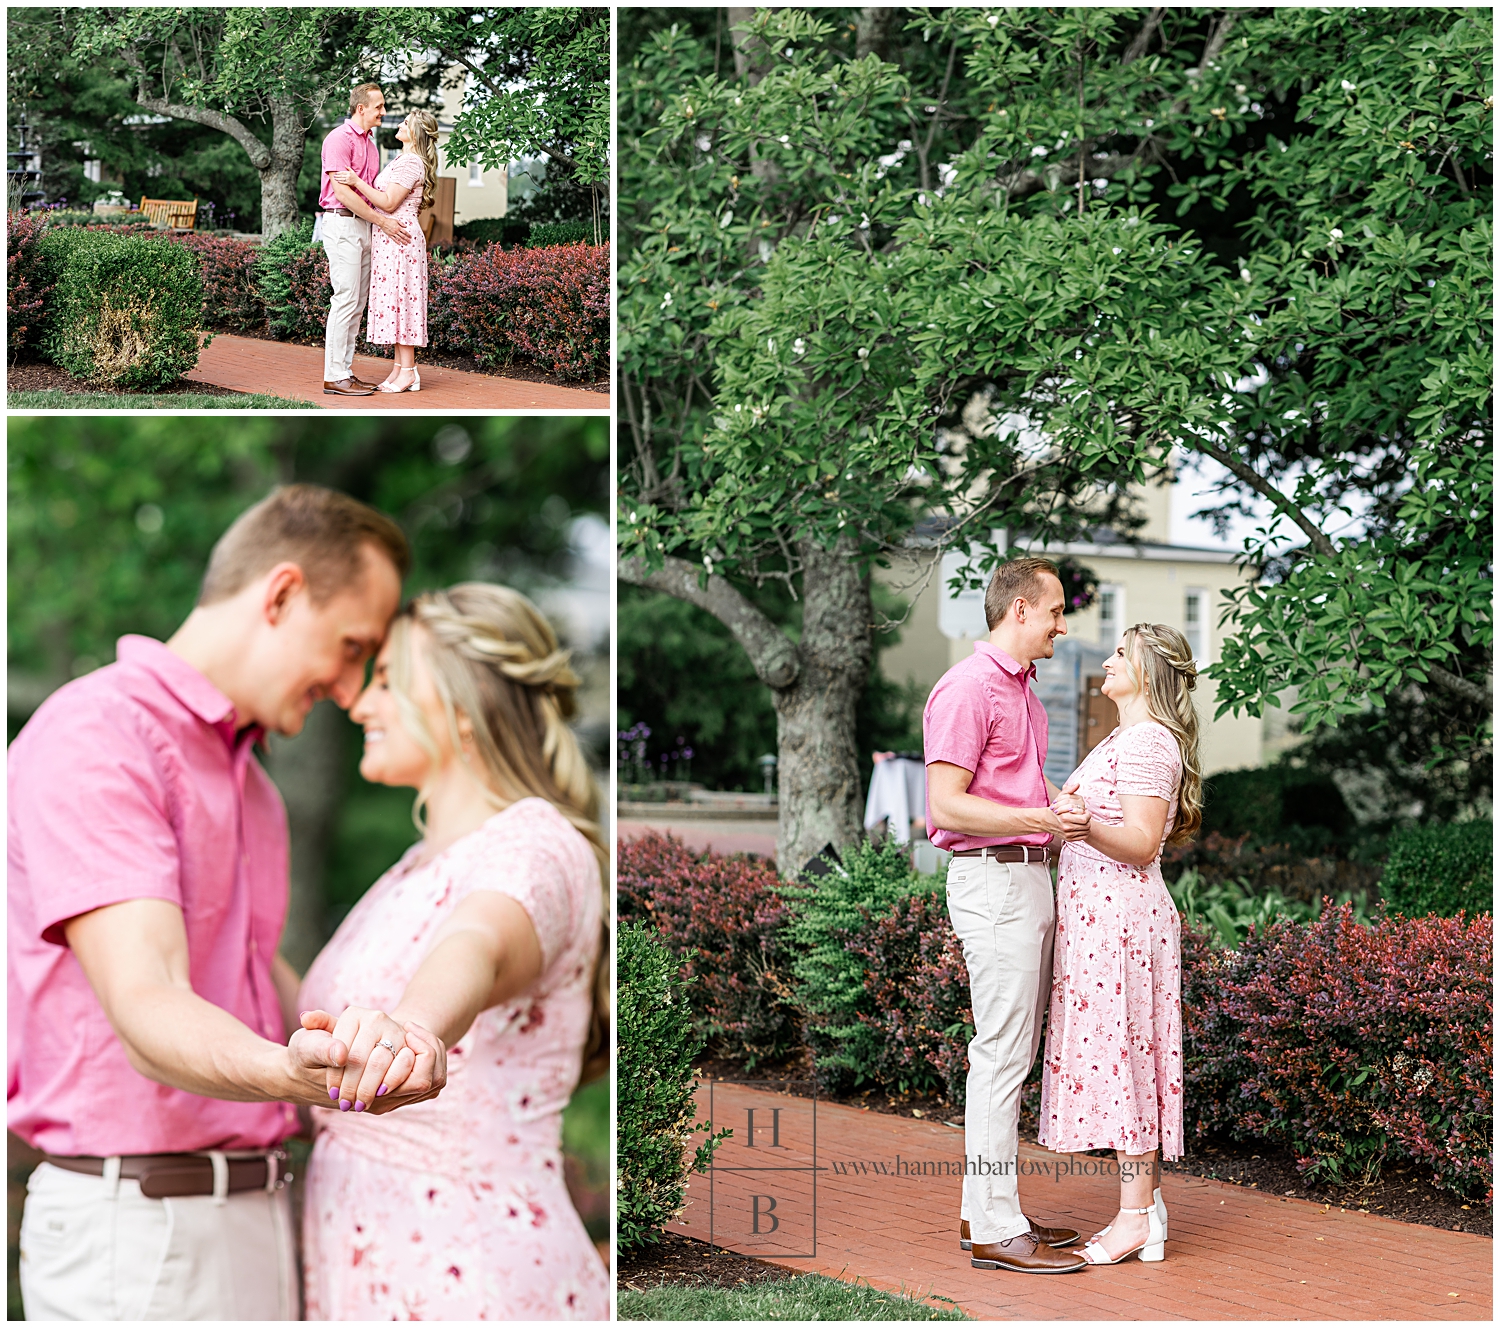 Man in pink shirt dances with fiancé in pink floral dress under tree for engagement photos.